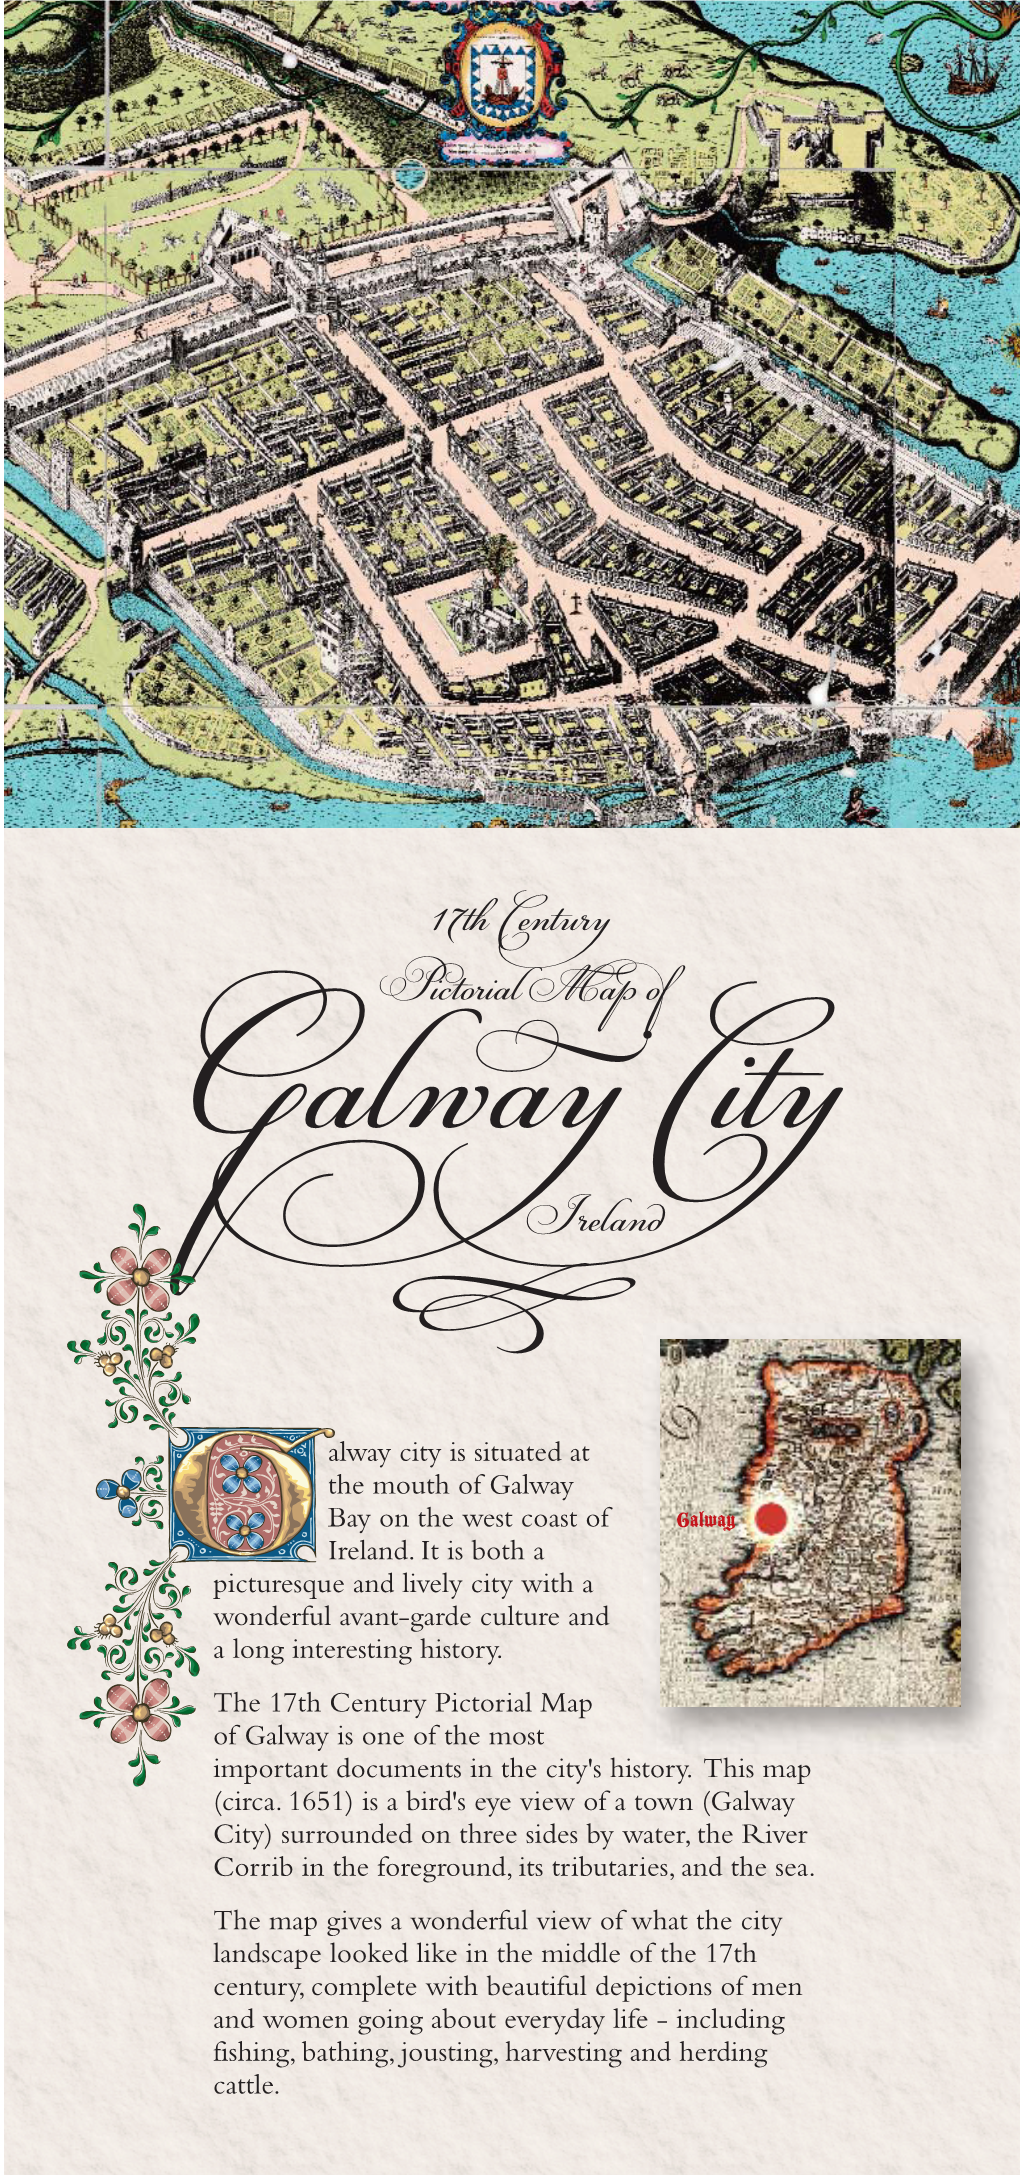 17Th Century Pictorial Map of Galway Is One of the Most Important Documents in the City's History